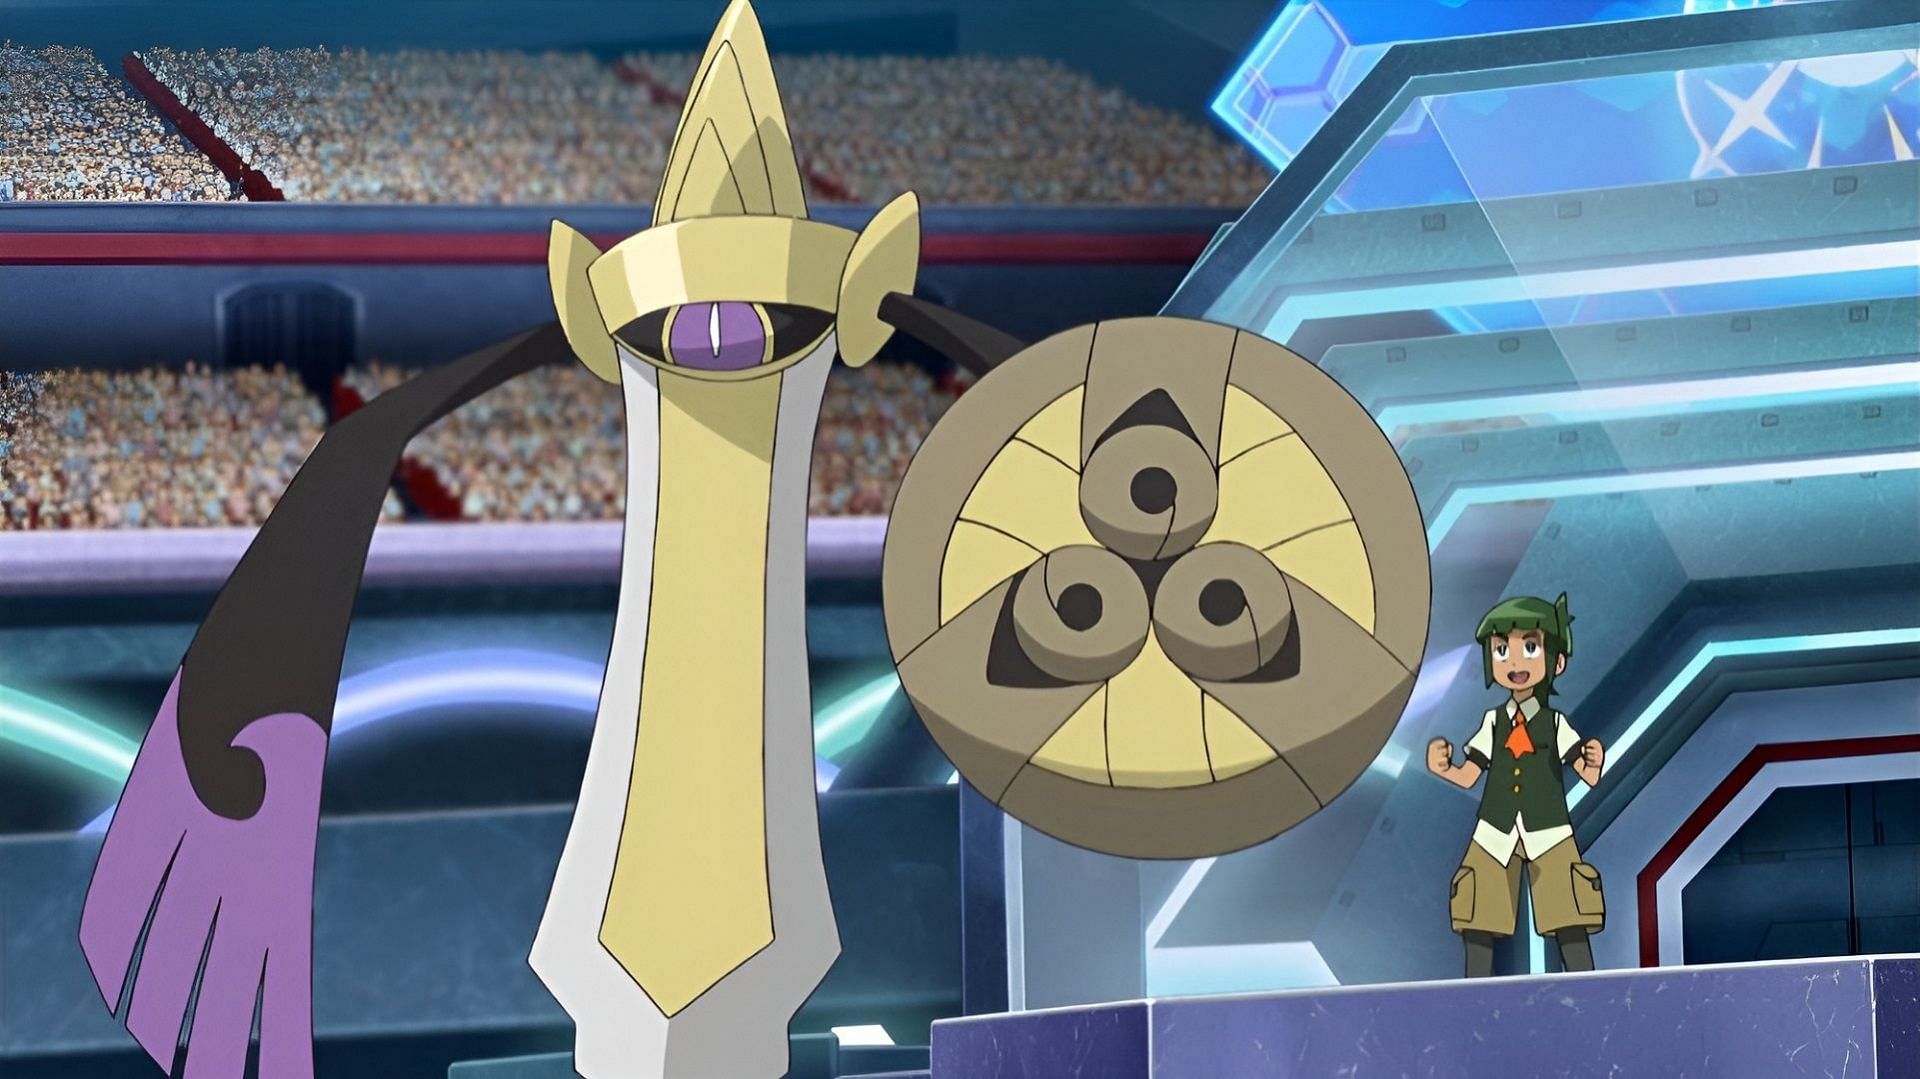 Aegislash&#039;s versatility made it a menace before it was classified as an Uber (Image via The Pokemon Company)